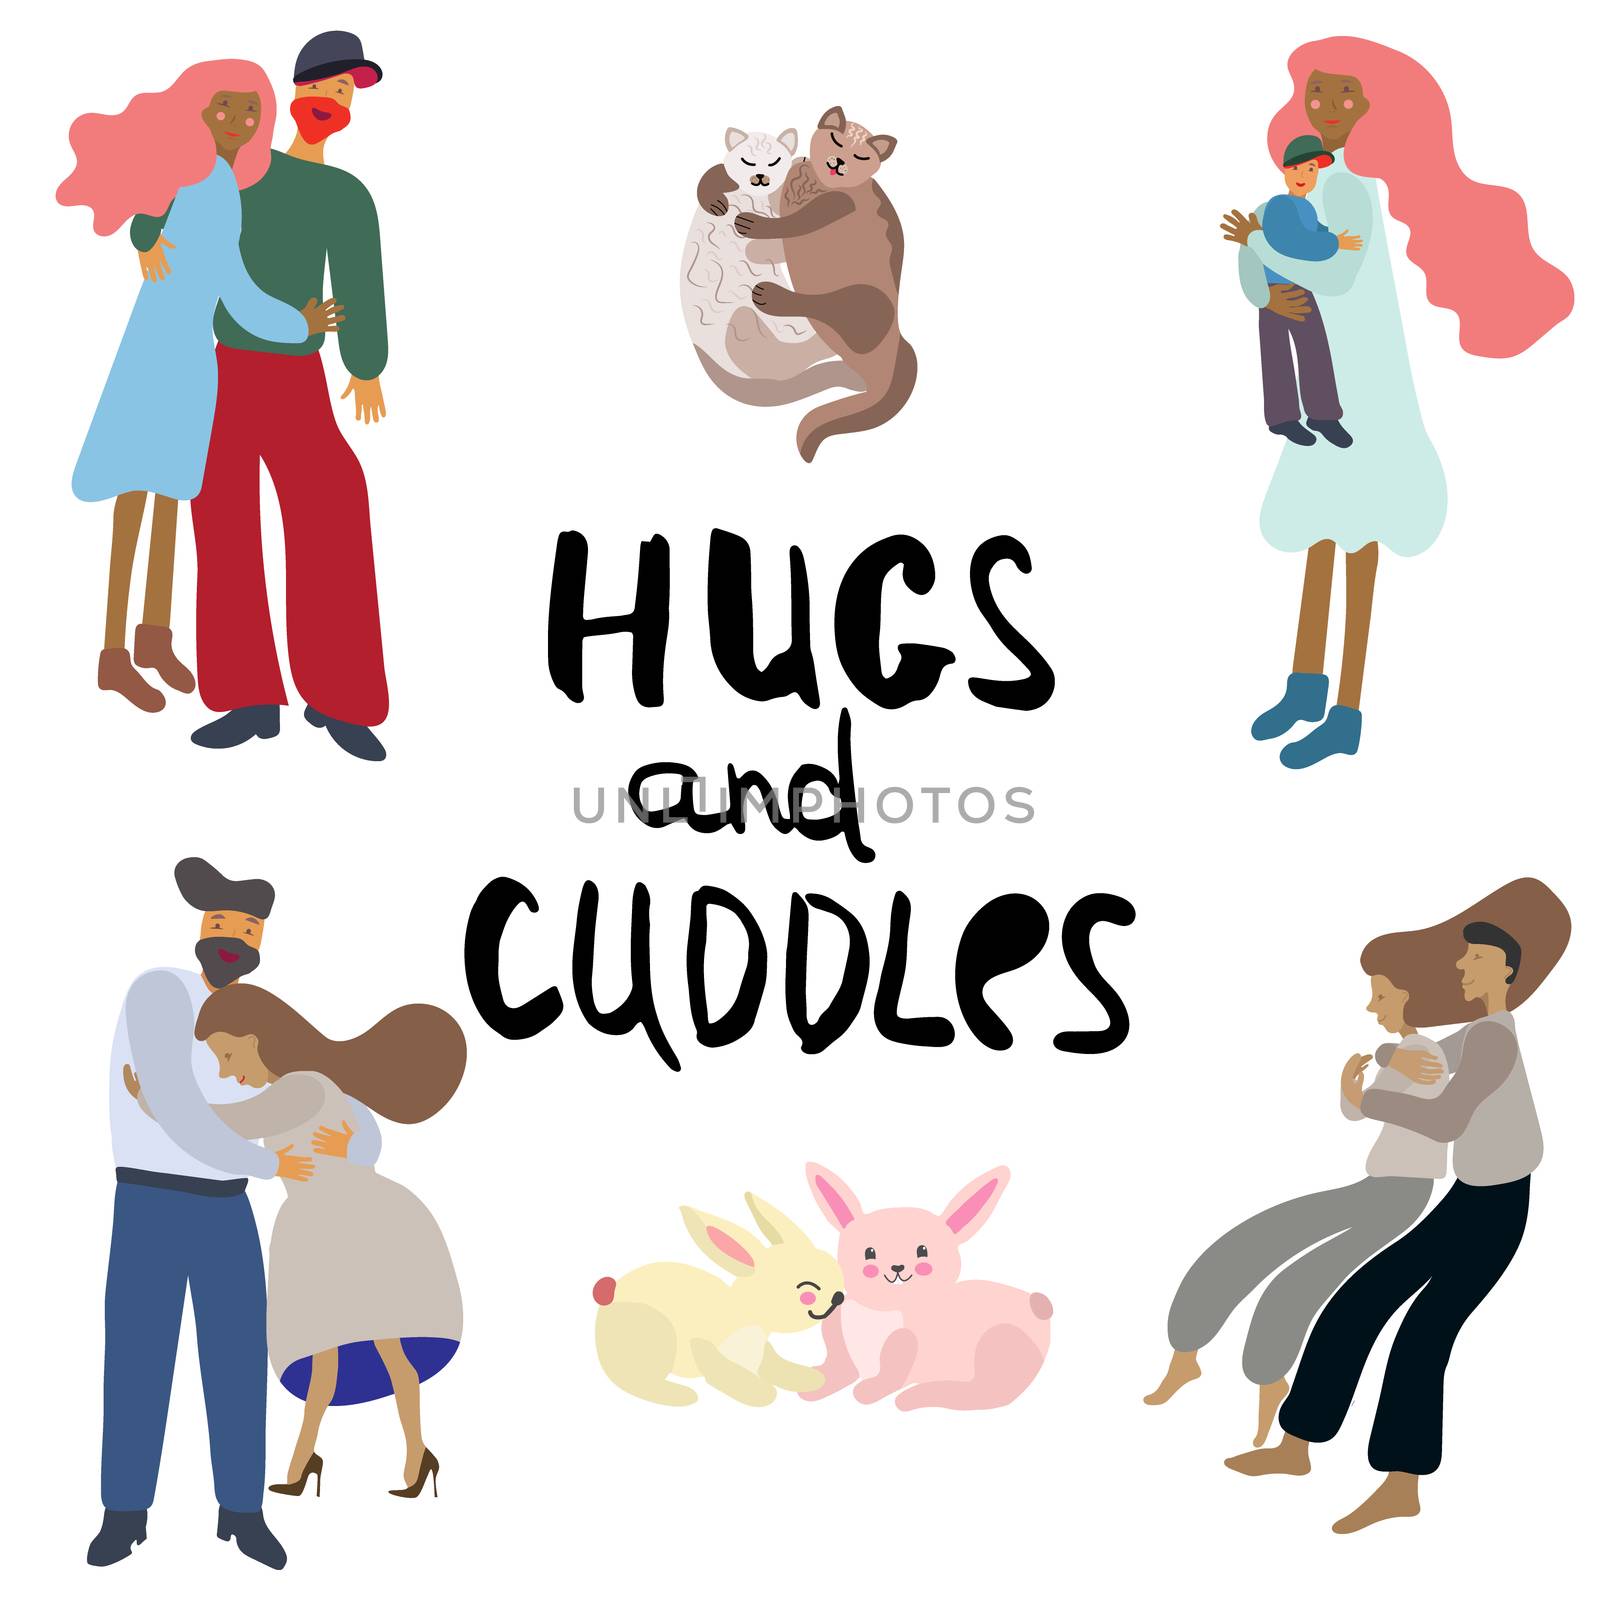 Hugs and cuddle people and animals vector illustration on white background. Handwritten note hugs and cuddle.